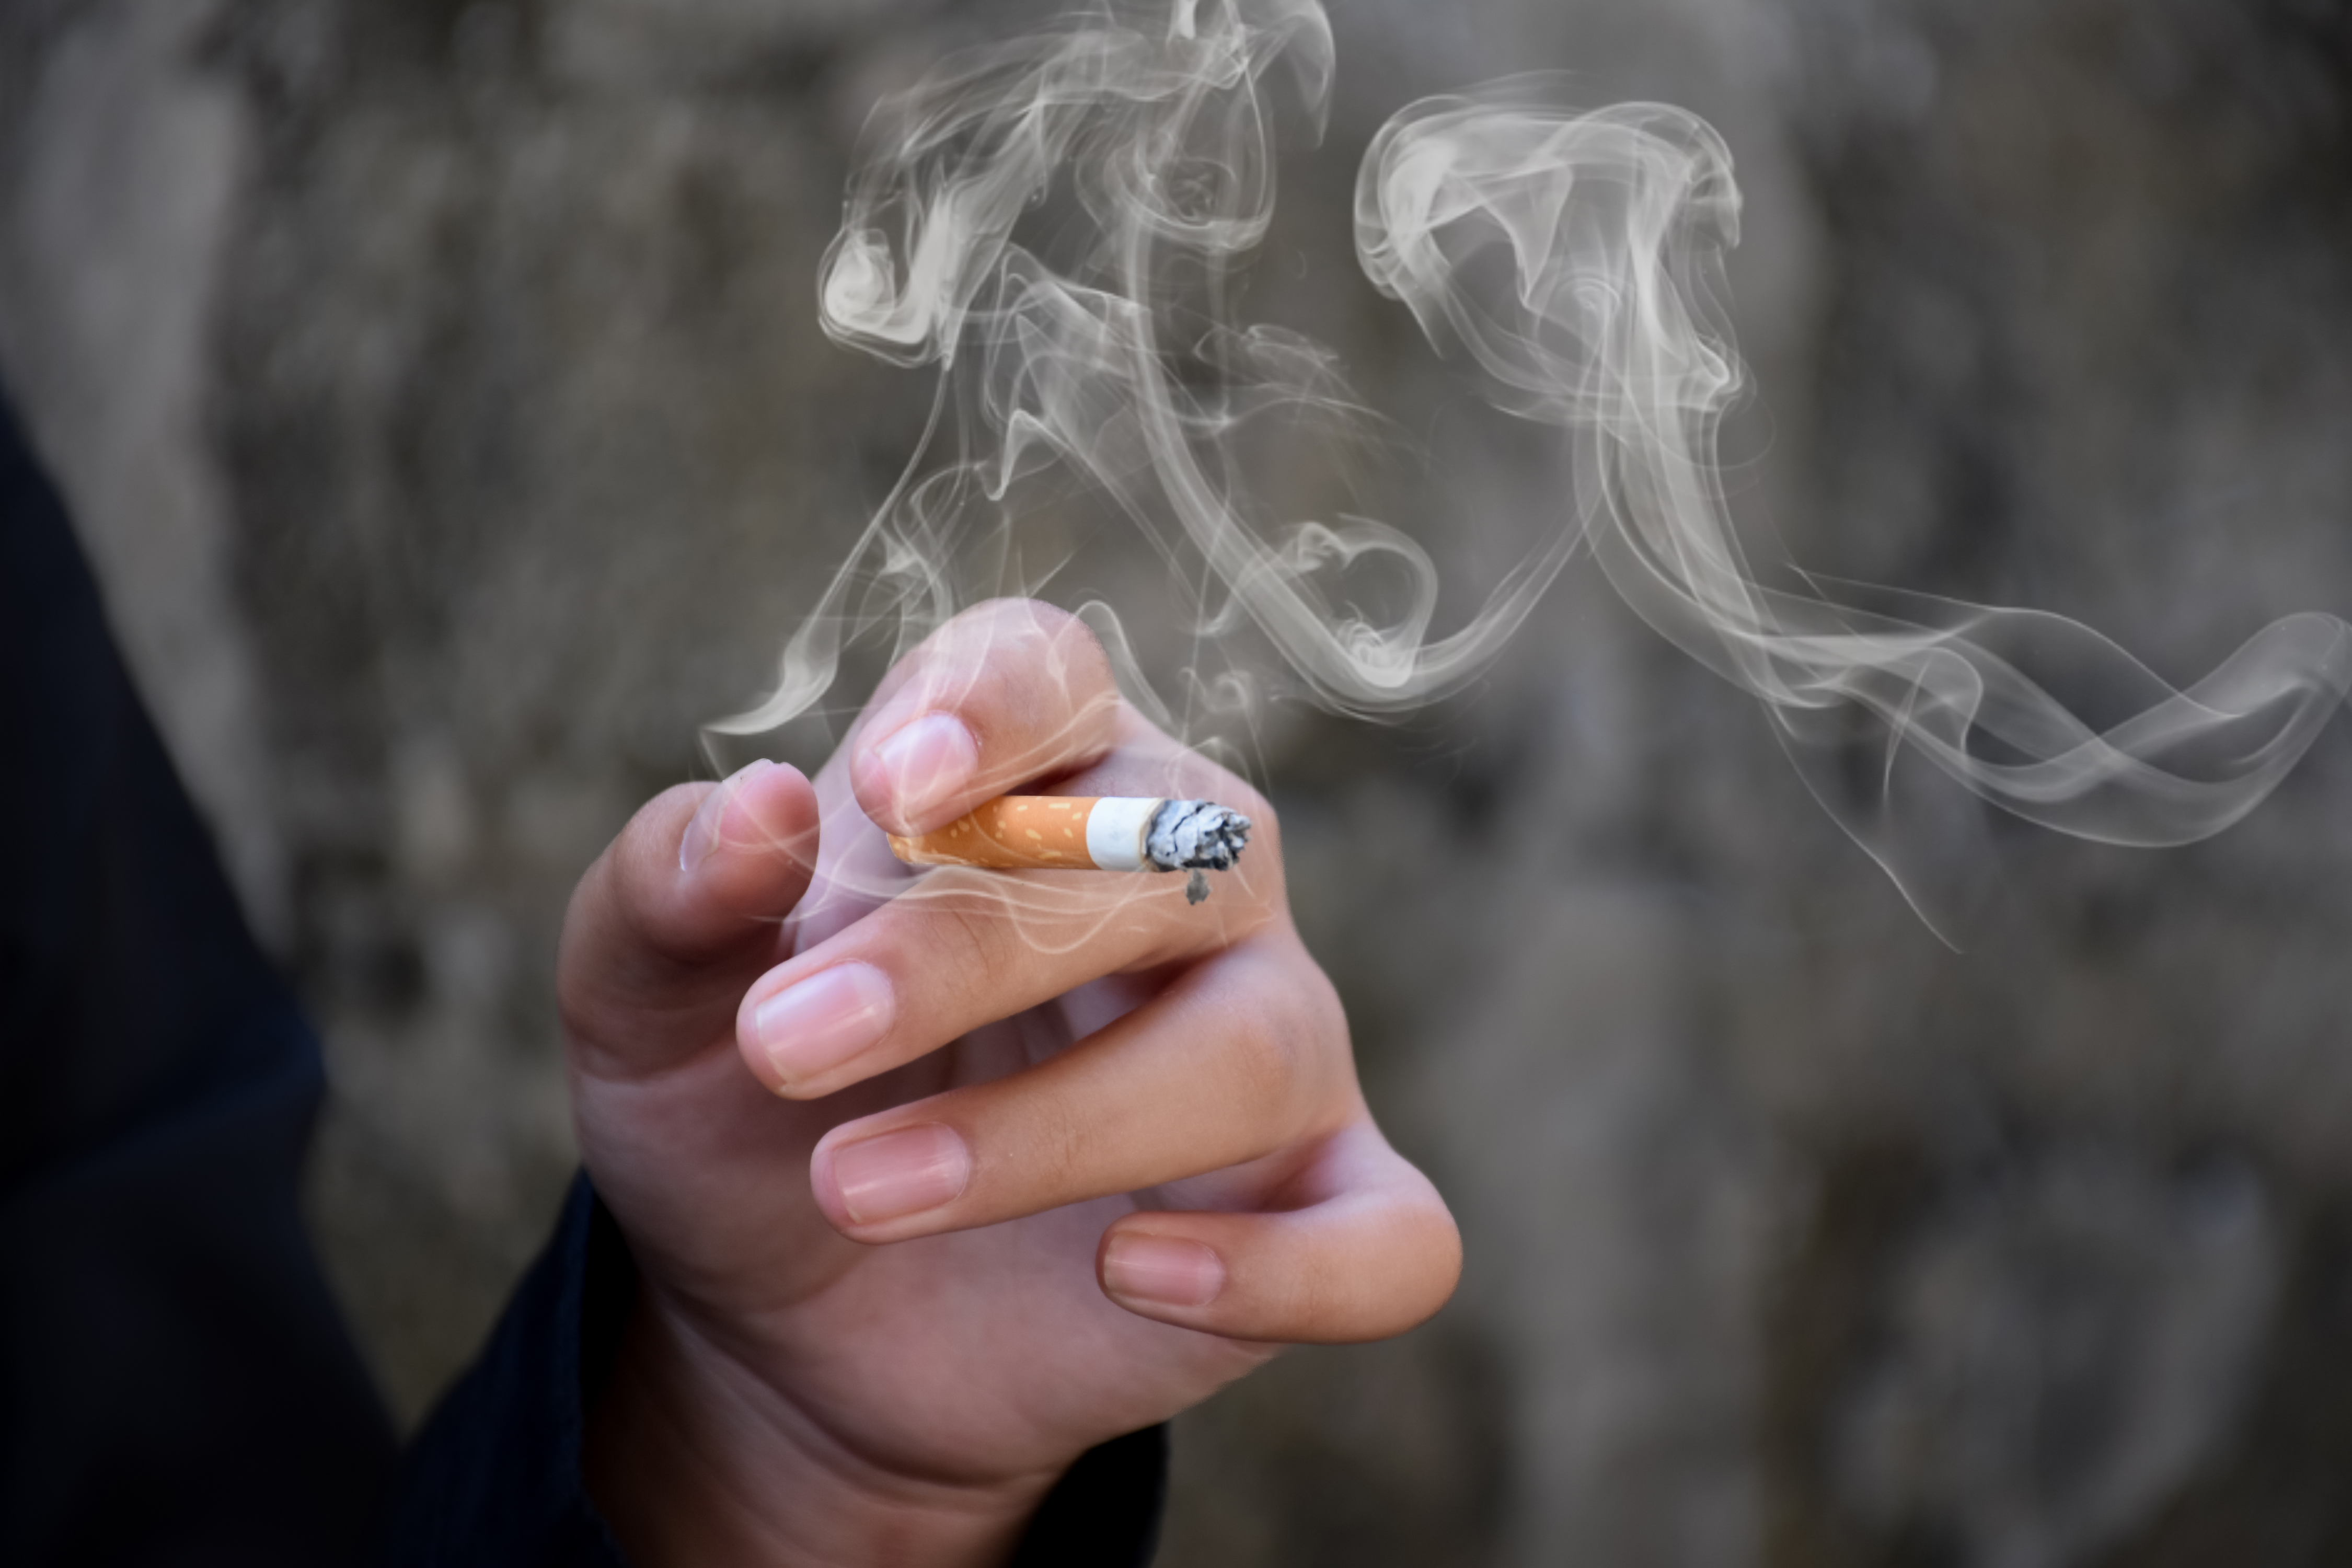 NEWSLINE: A smokers rights activist shares her thoughts on smoking bans